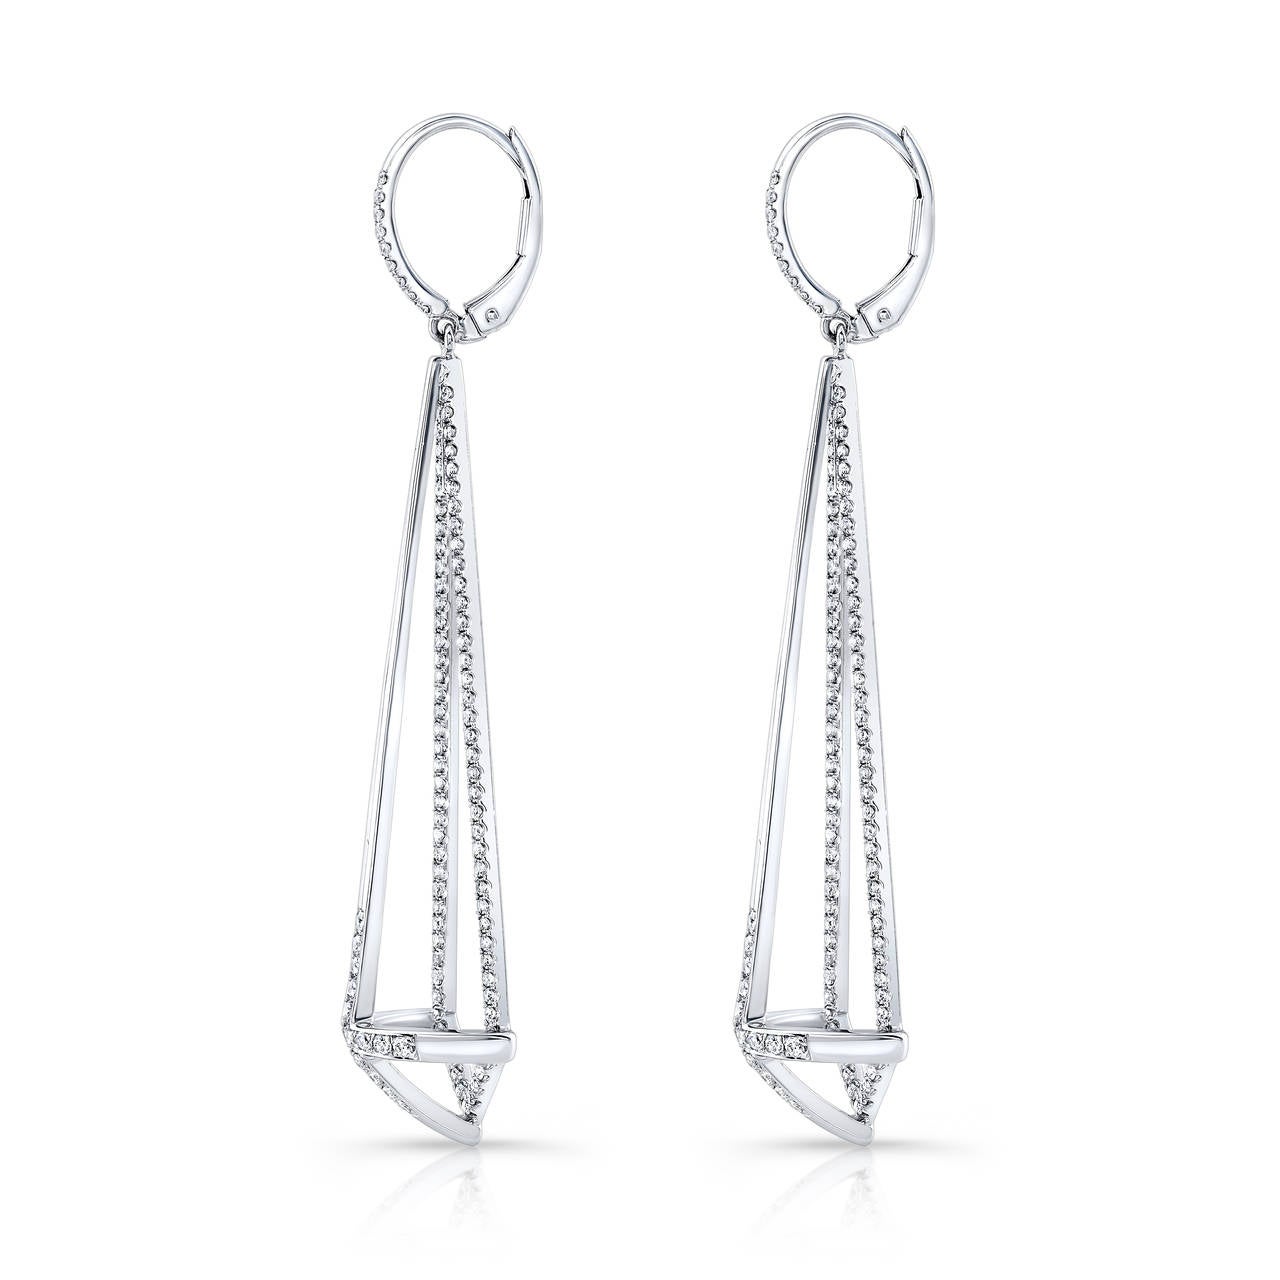 18k white gold Dagger earrings with open frame work set with white diamond micro pave.